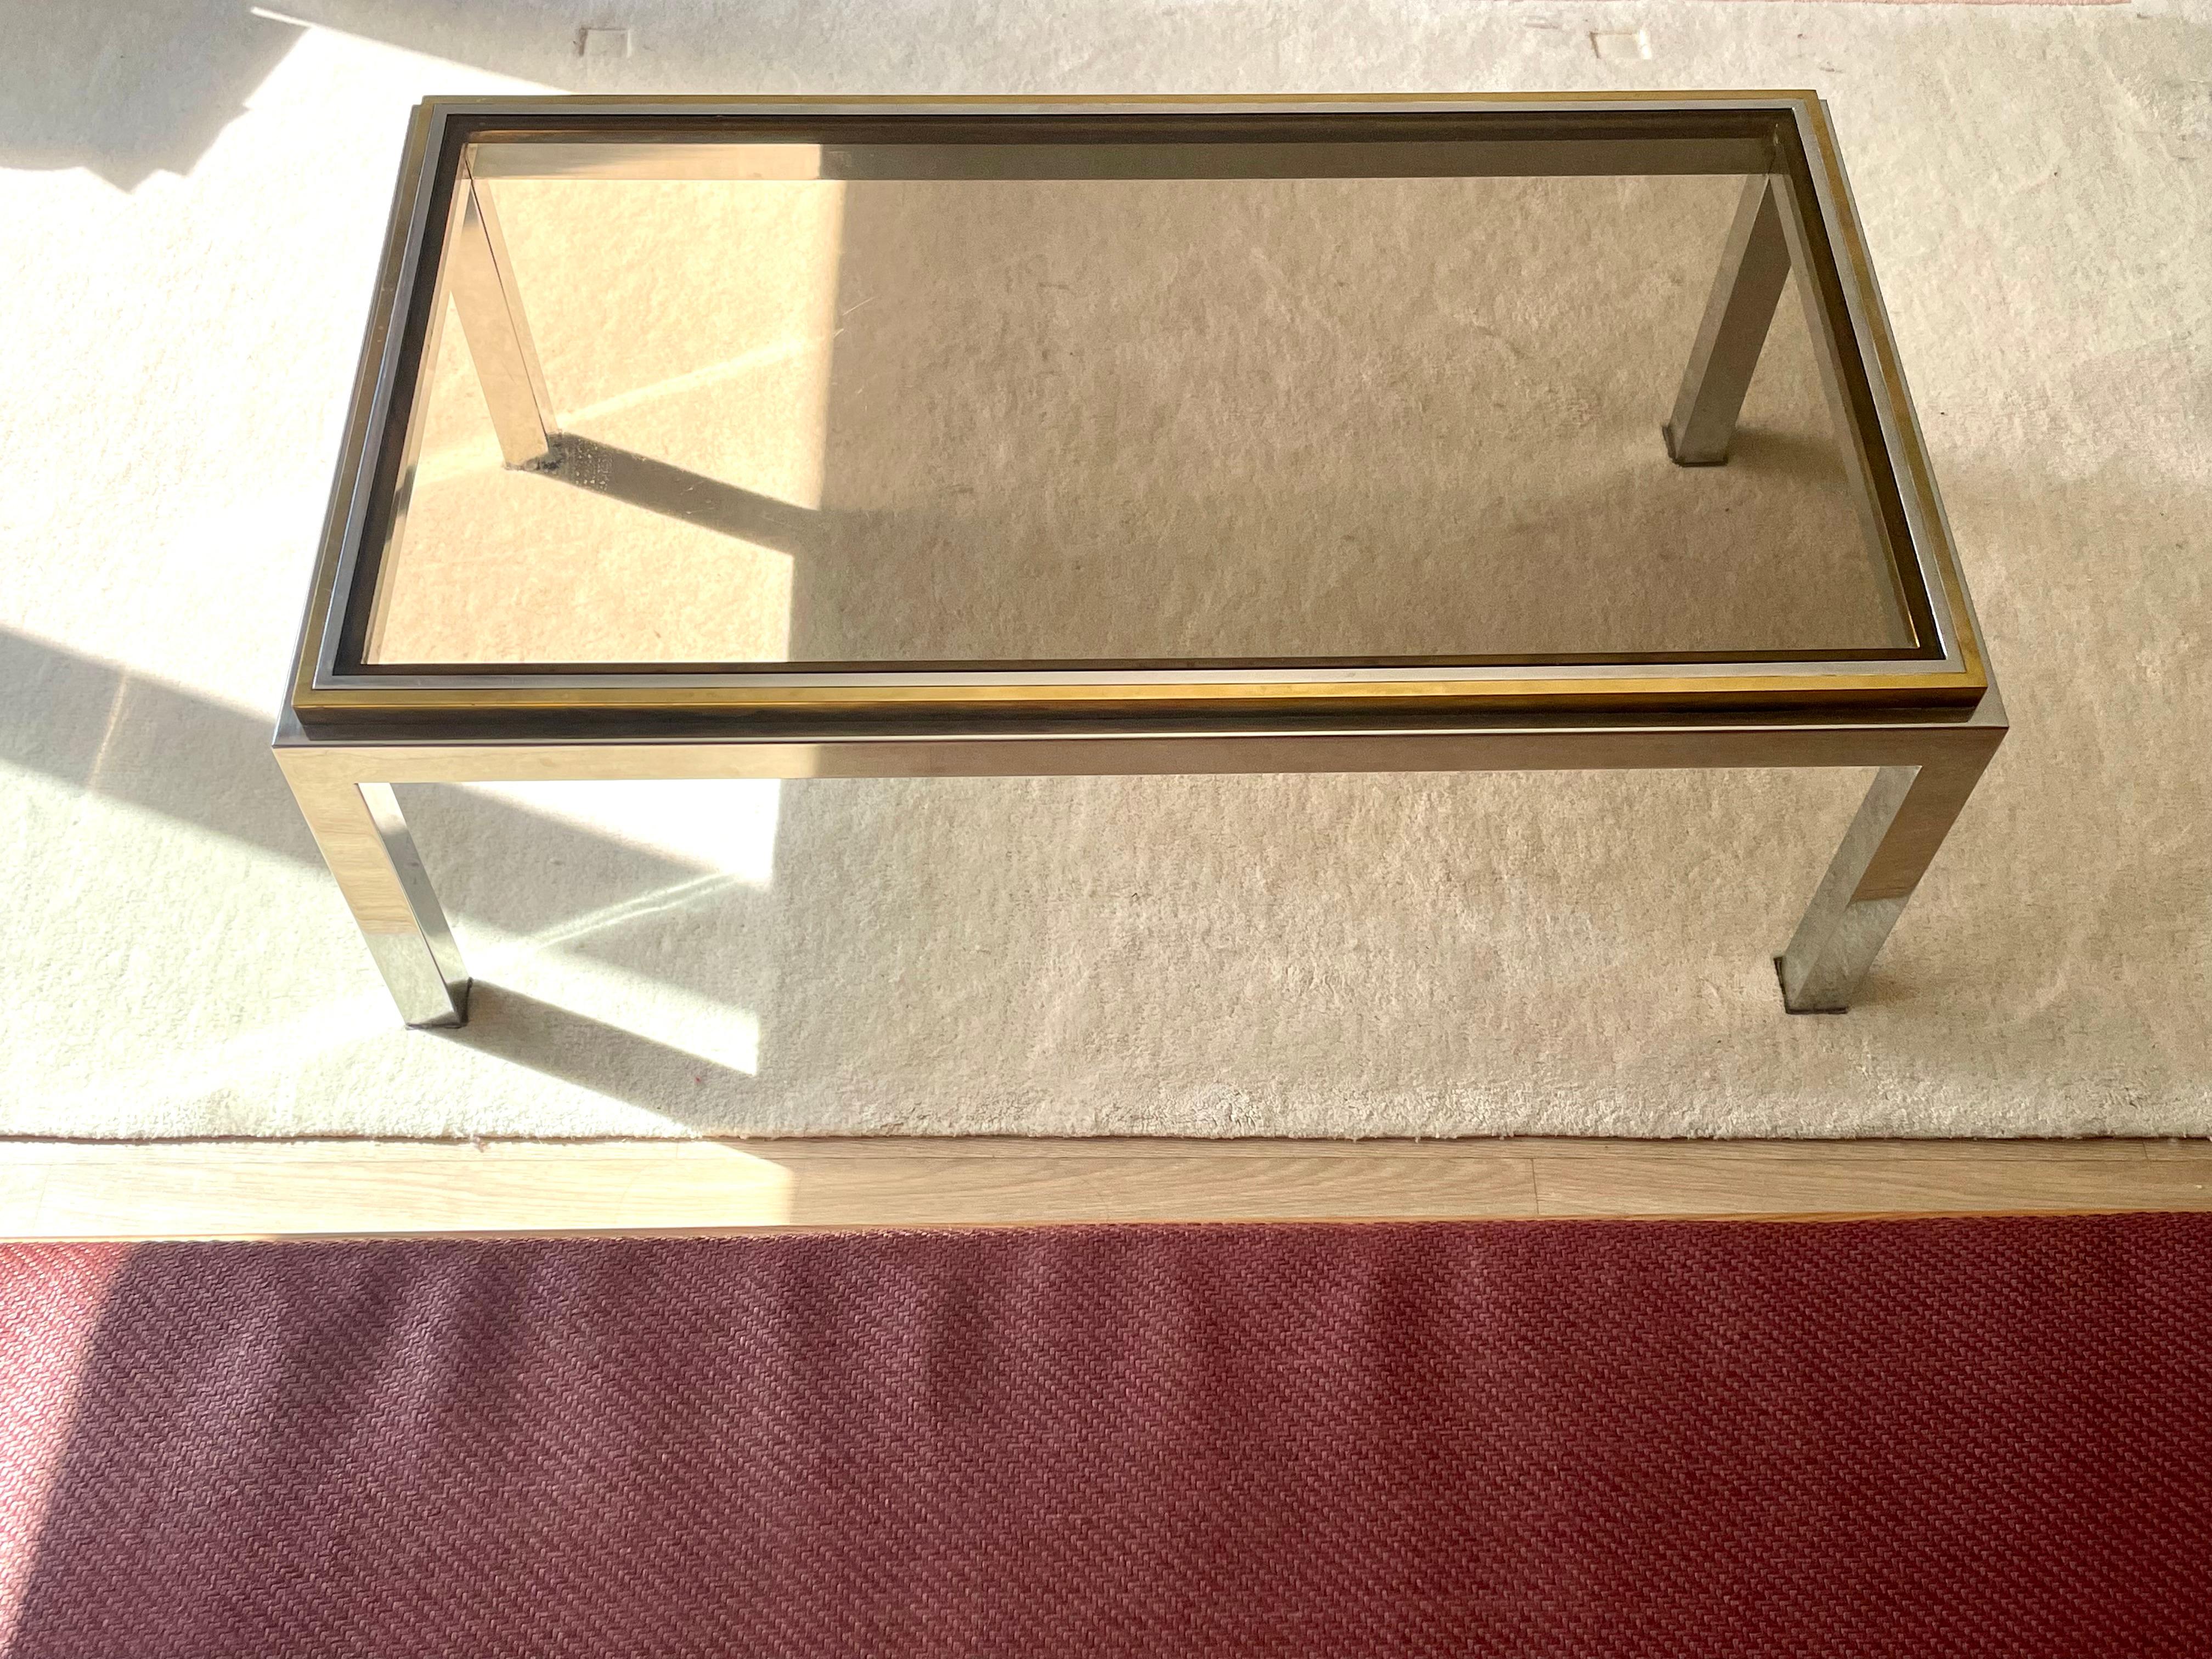 Italian Low table by Willy Rizzo - model Flaminia -circa 1970 For Sale